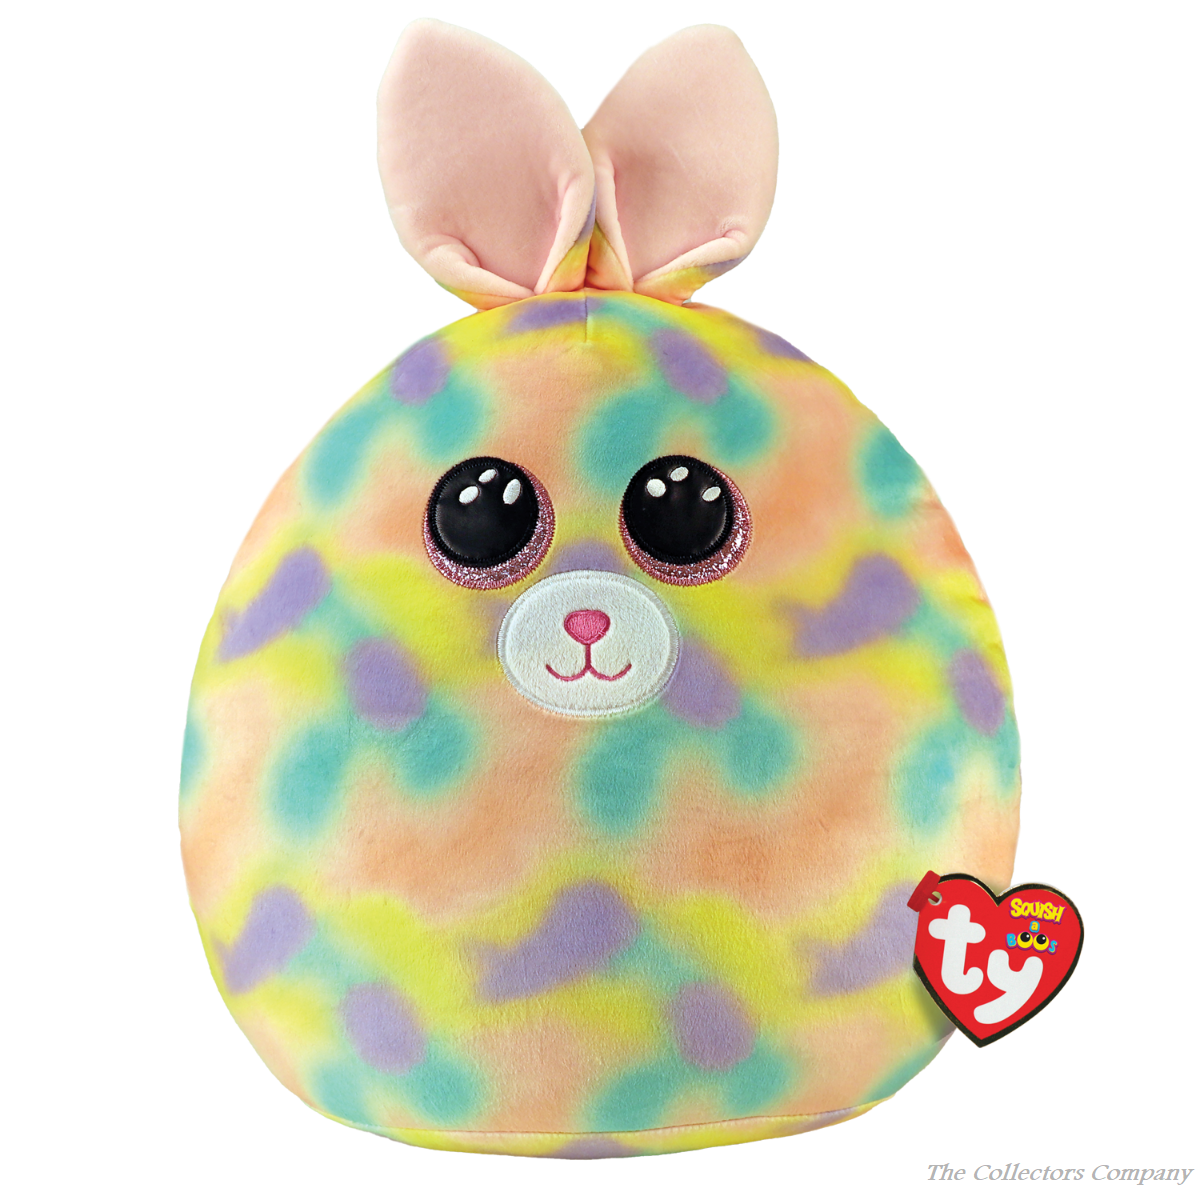 TY Furry Bunny Easter Squish-A-Boo-small